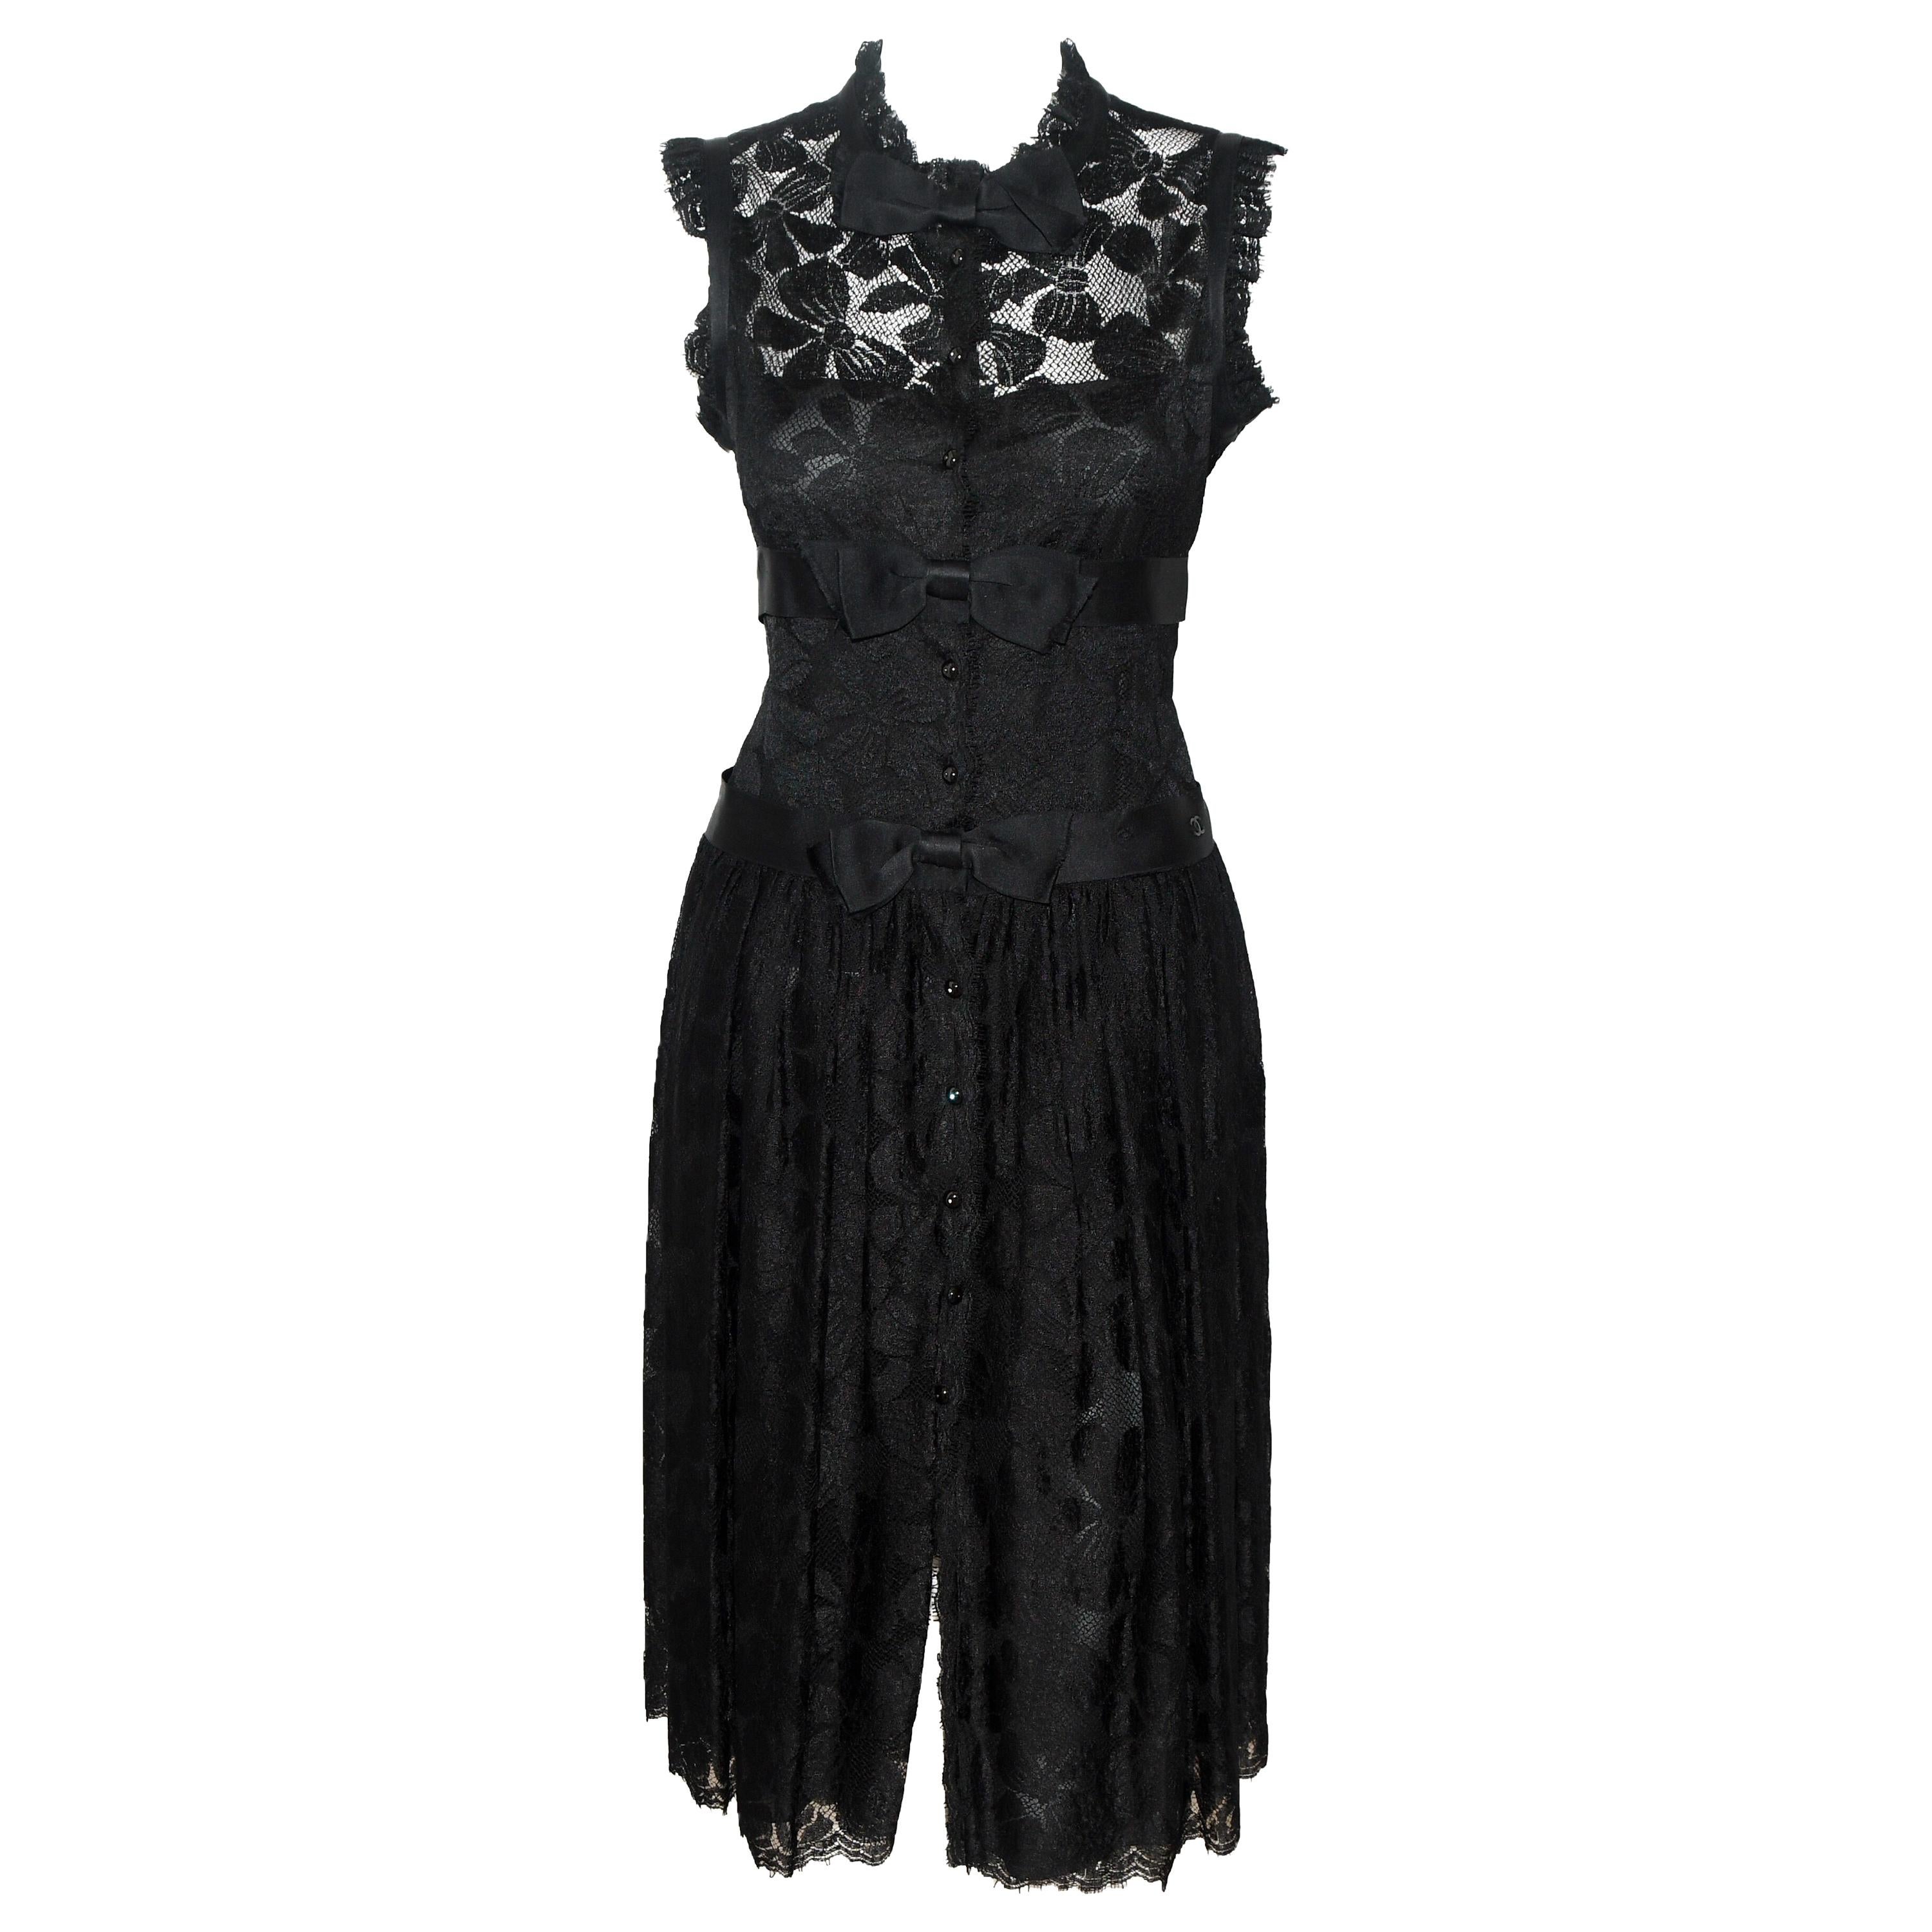 Chanel Black Lace Evening Dress 2005 Fall Season With Button Down Front Closure 